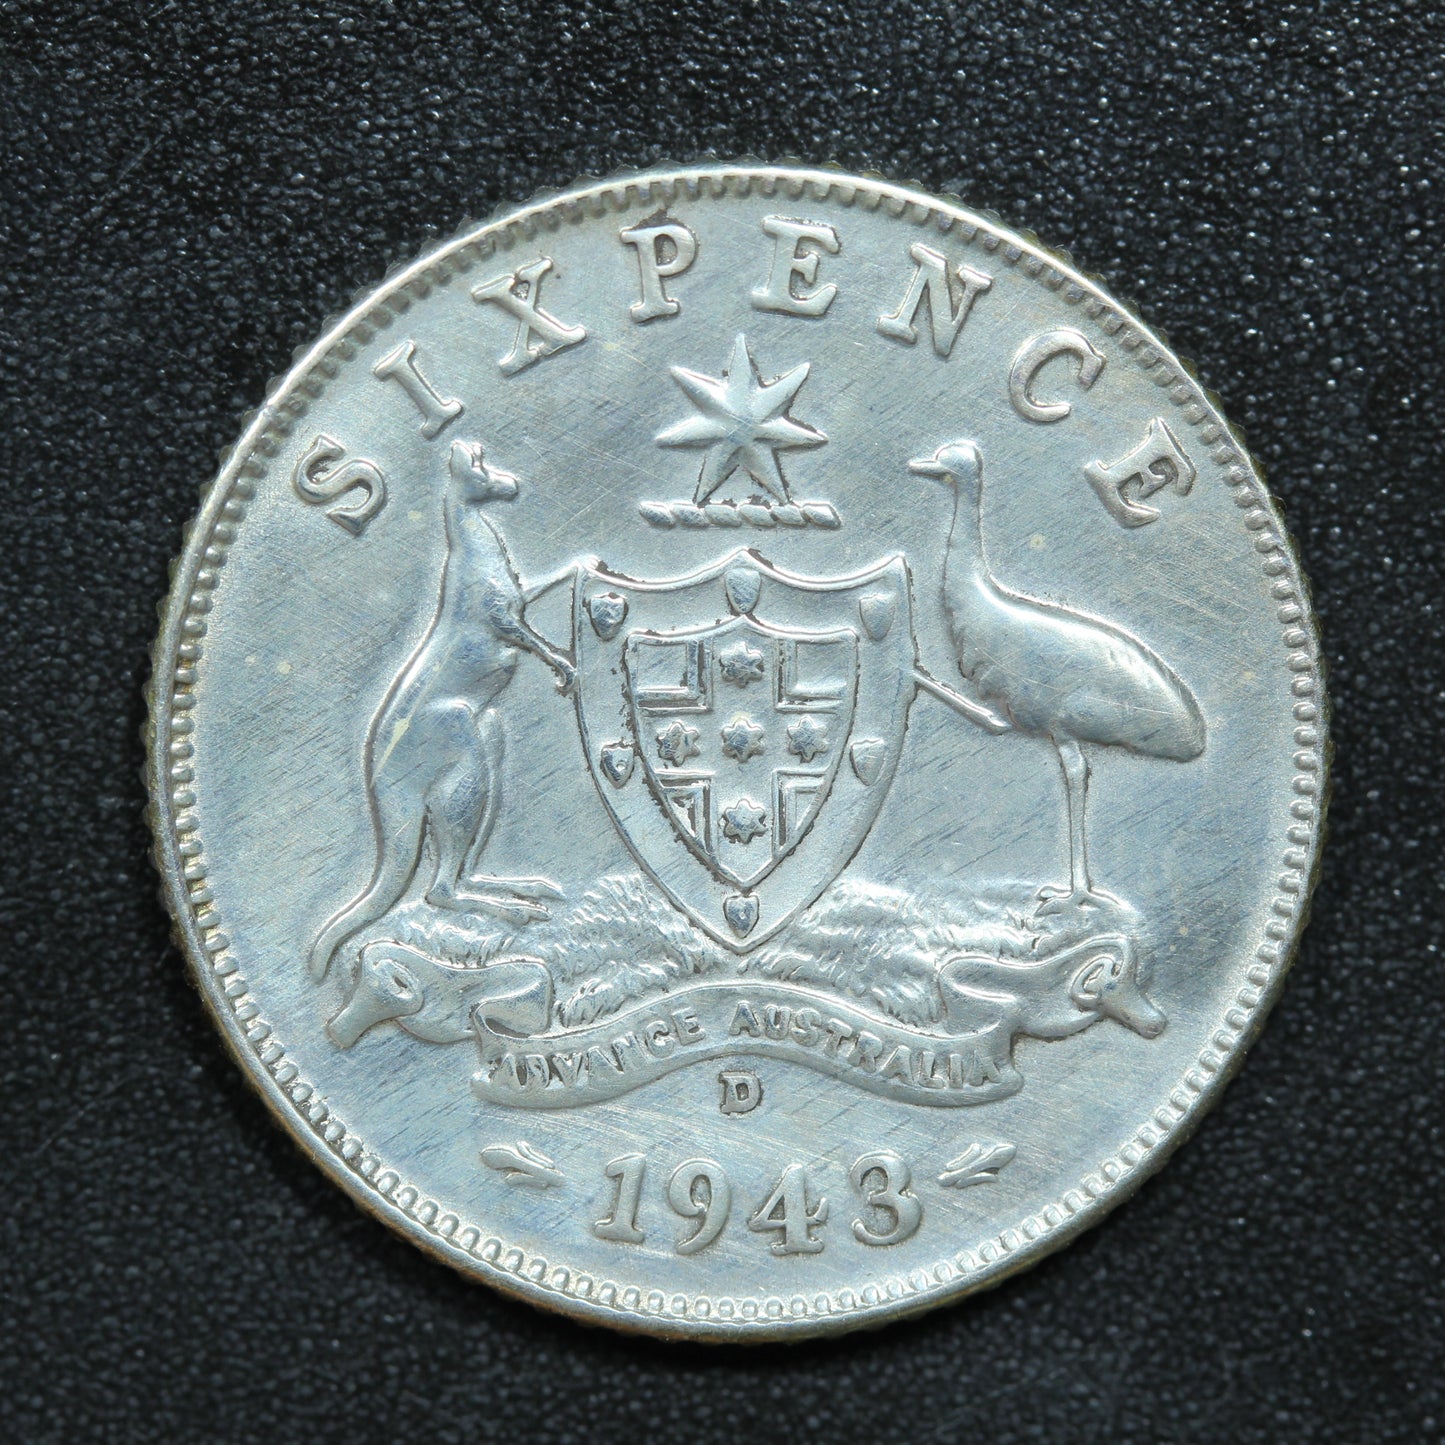 1943-D Australia Sixpence Silver Coin - KM# 38